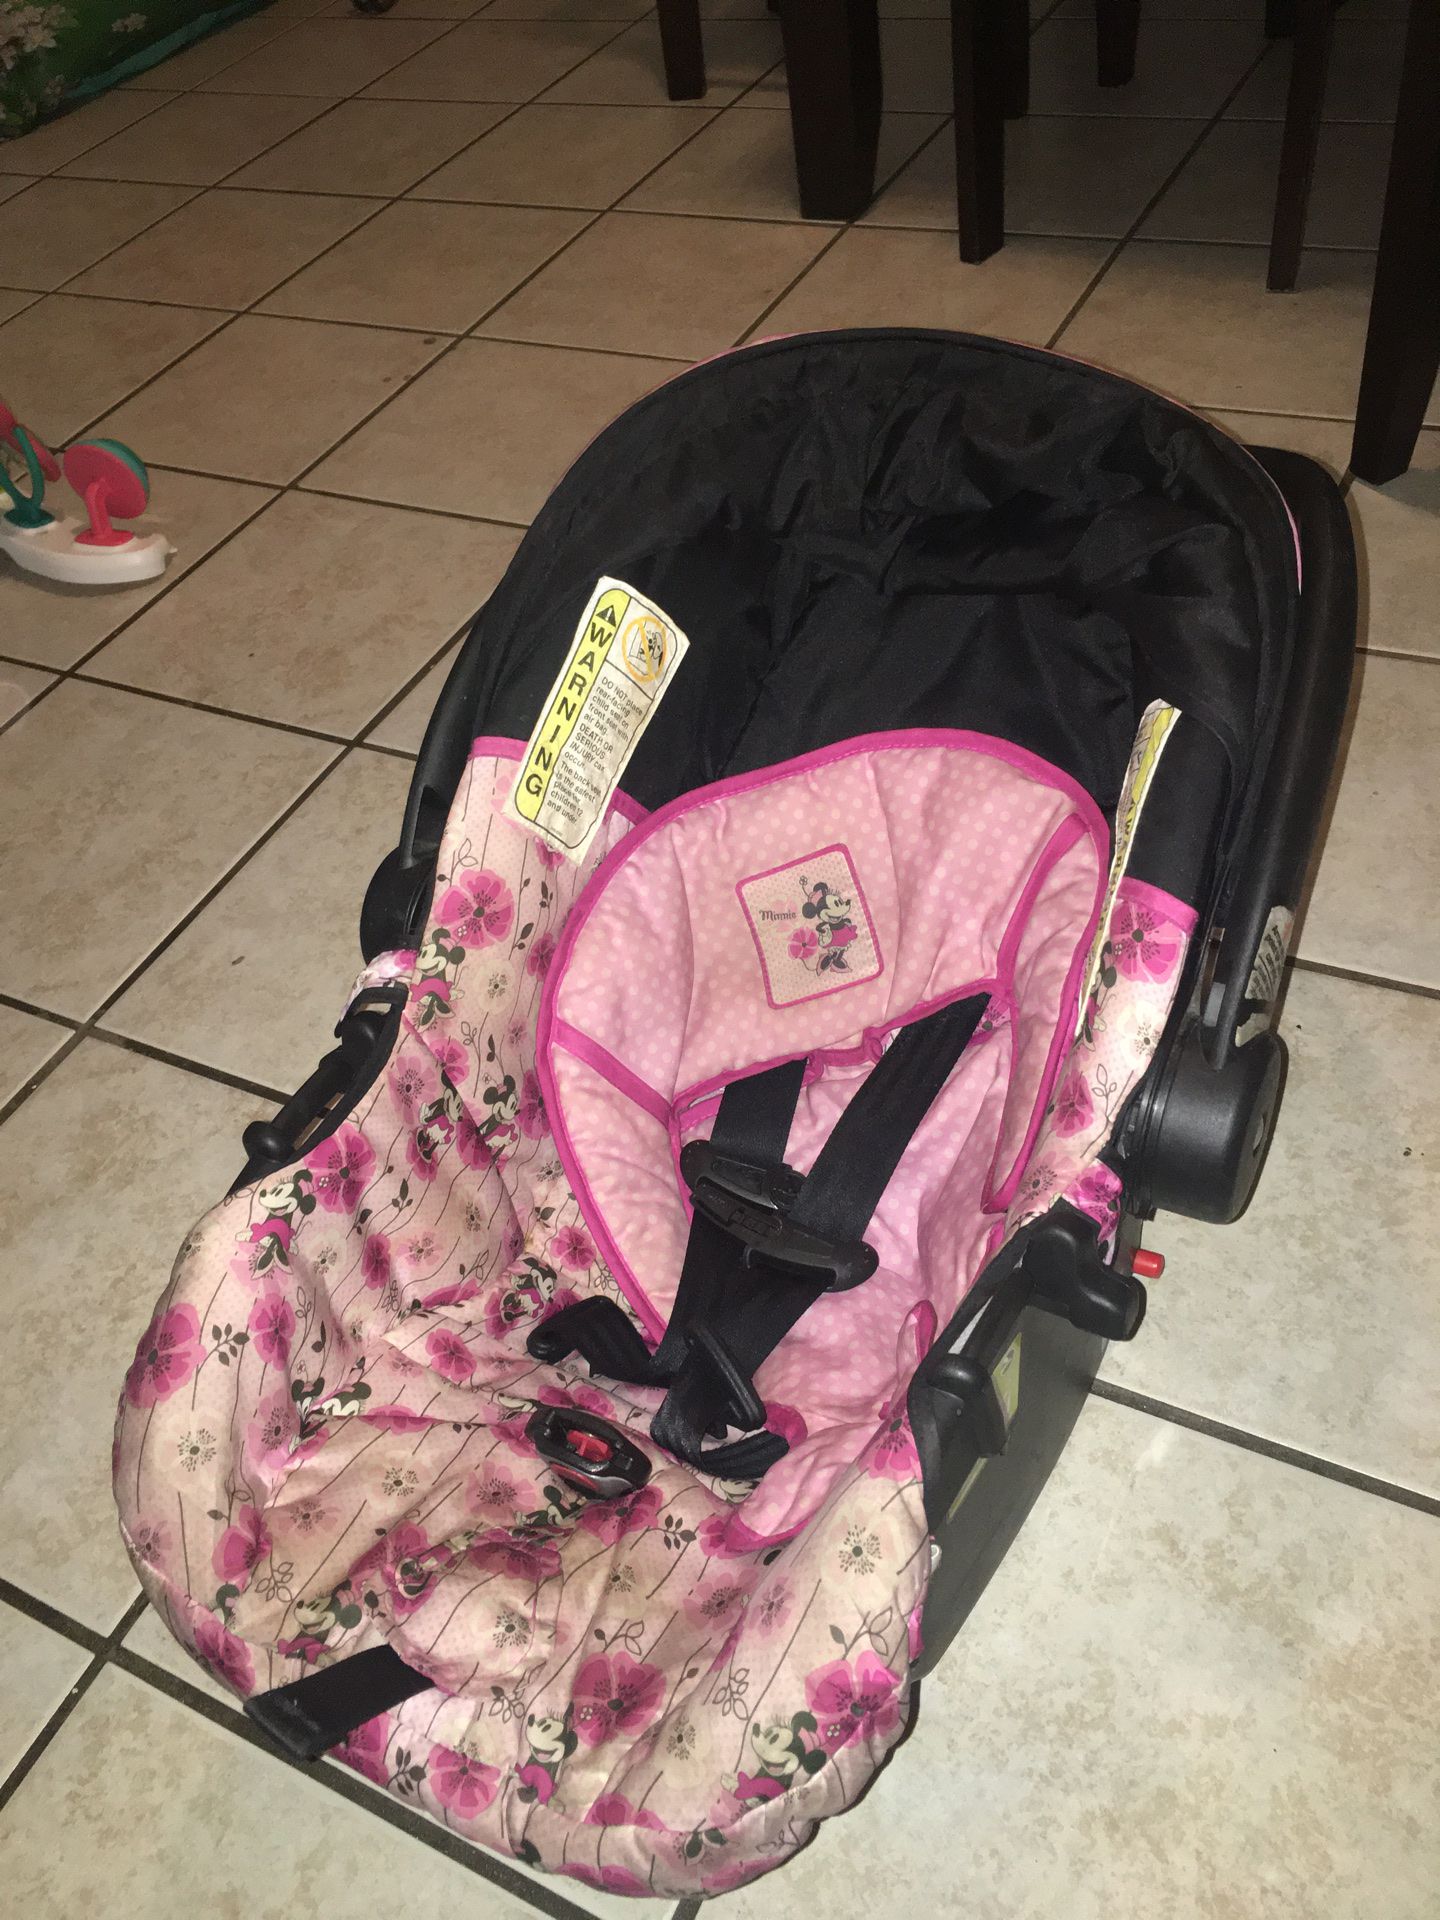 Minnie Mouse stroller and car seat